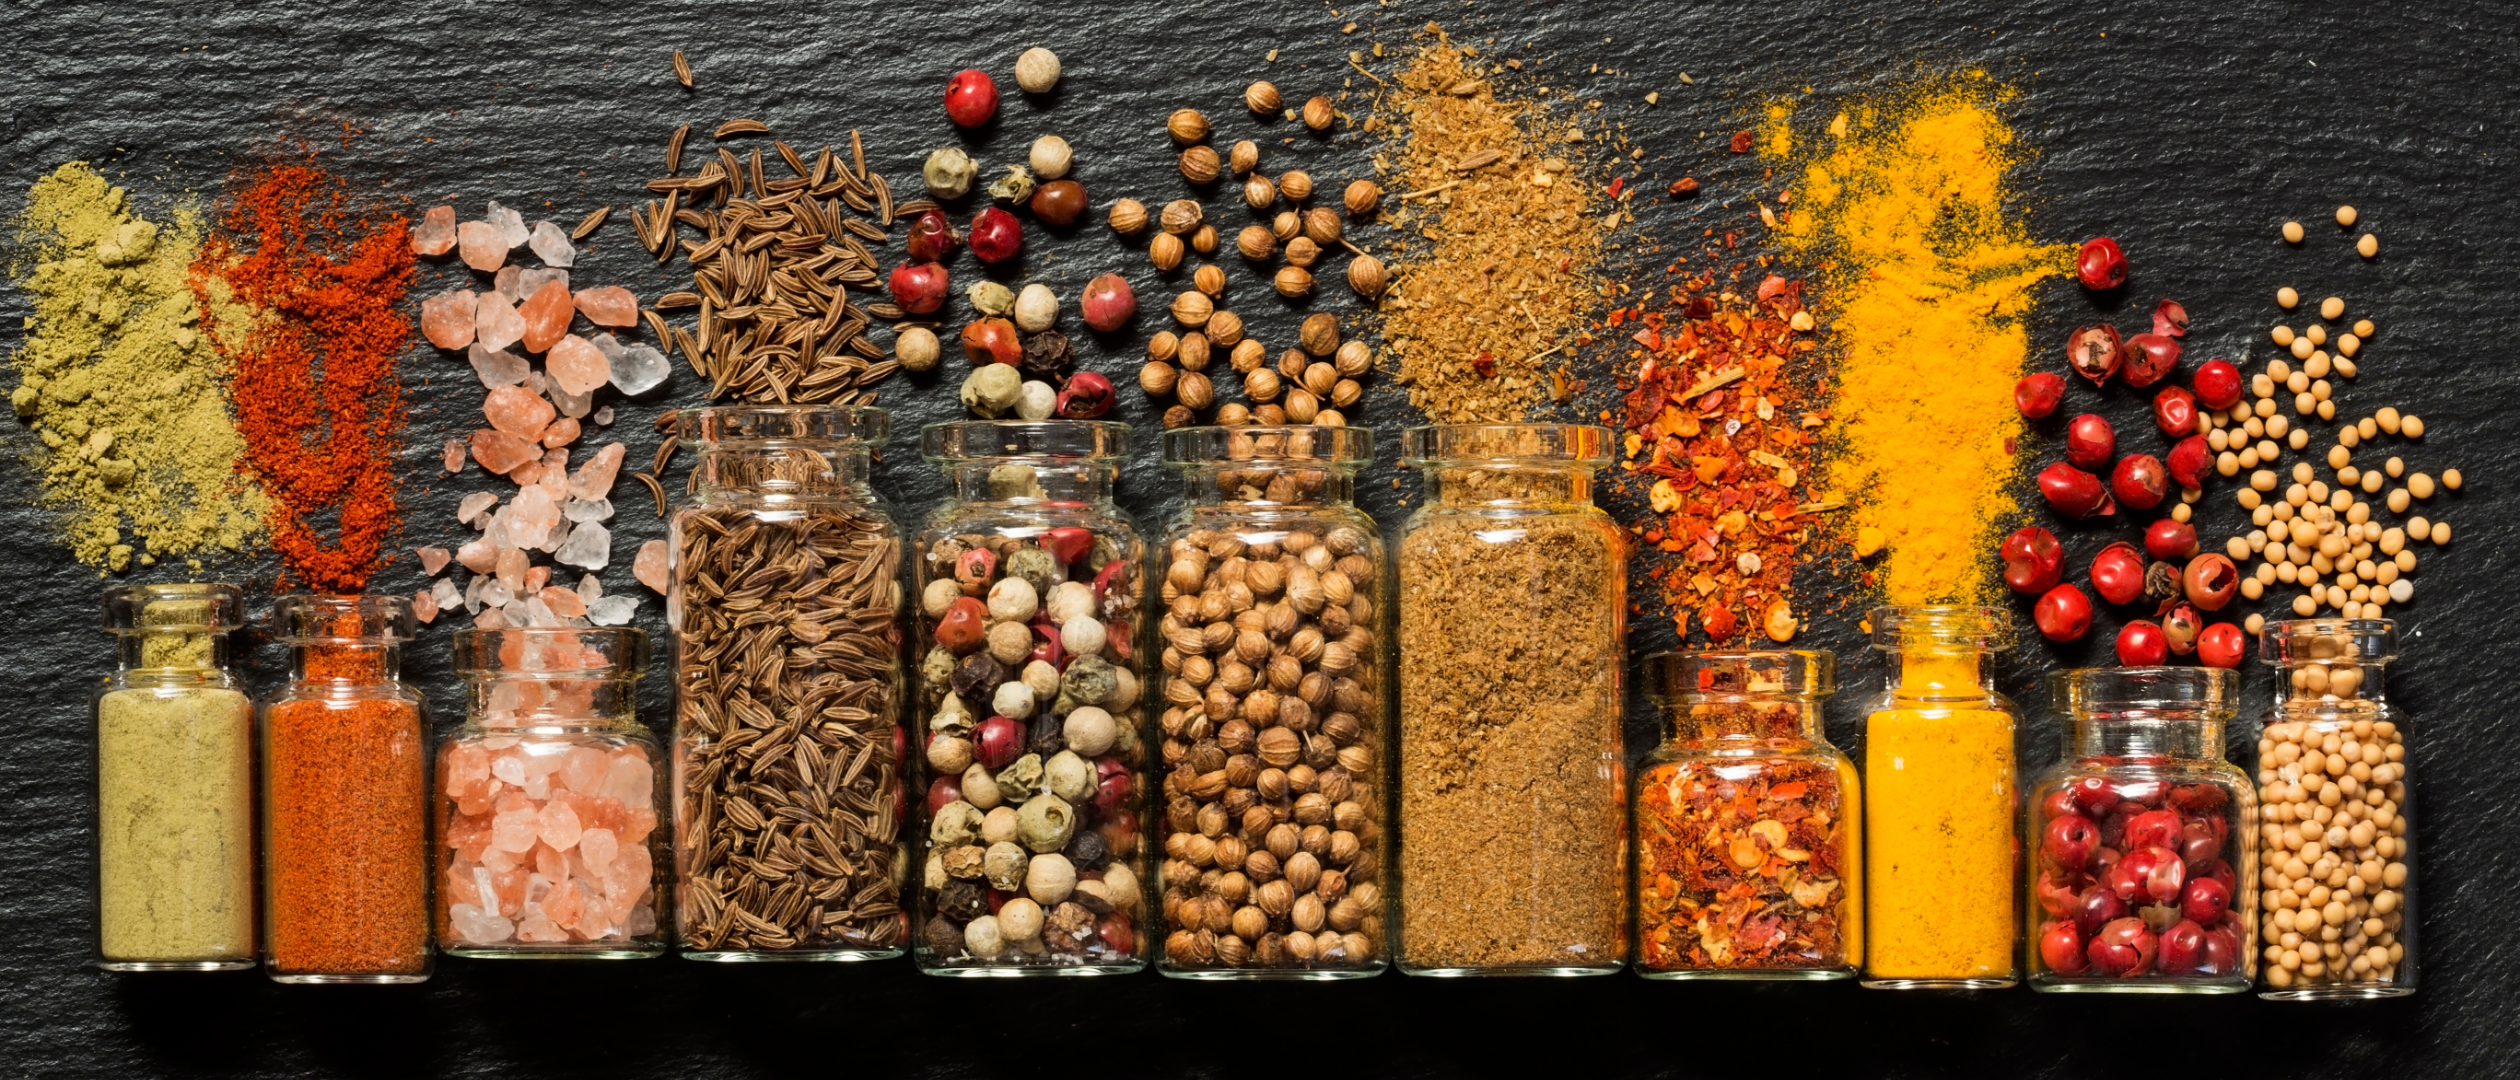 Spice Seeds Latest Price: Understanding Trends and Market Dynamics